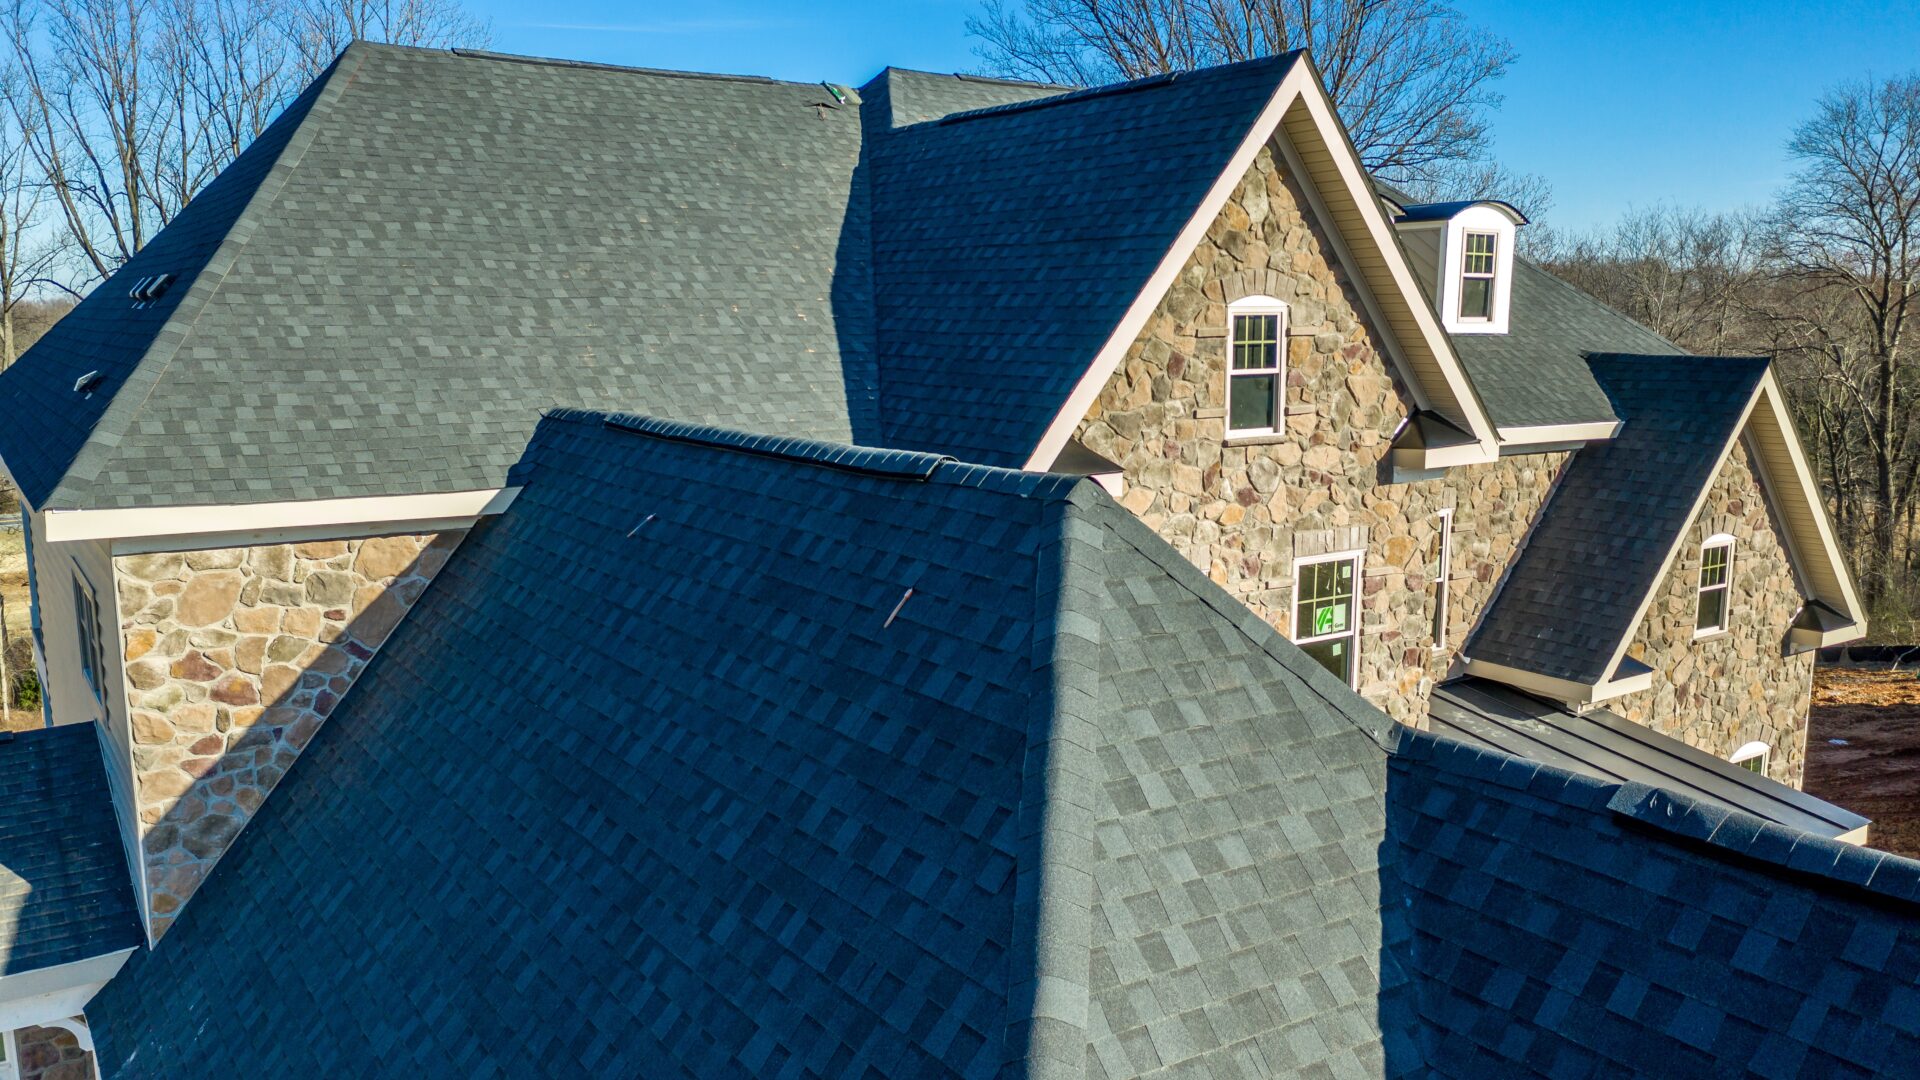 reliable roofing services seabrook brinkmann quality roofing services scaled Seabrook